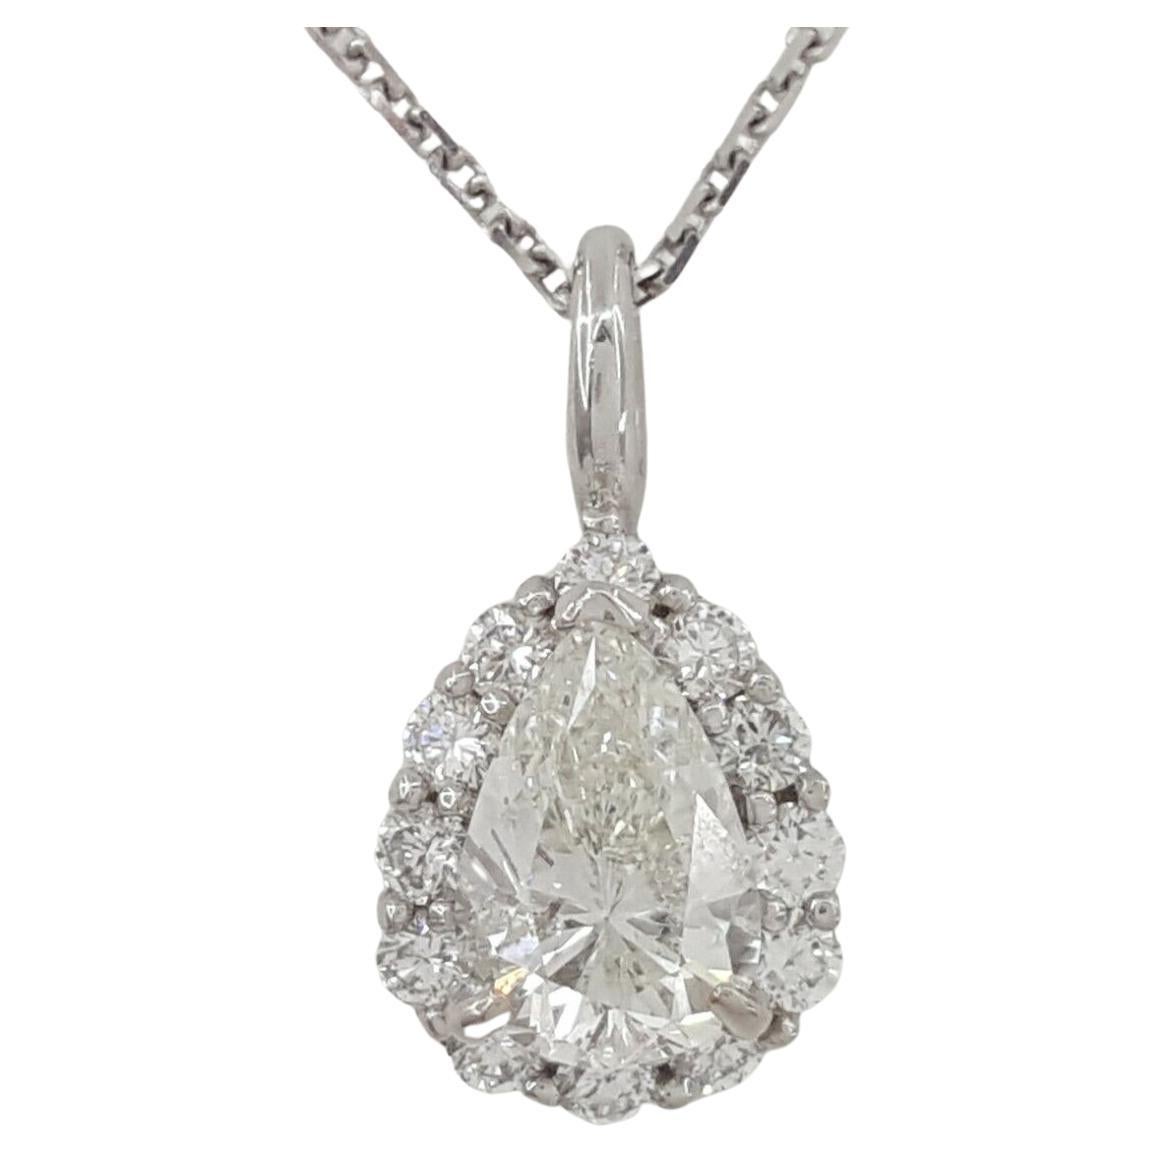 1.01 ct Total Weight 14K White Gold Pear Brilliant Cut Diamond Halo Pendant / Necklace 18